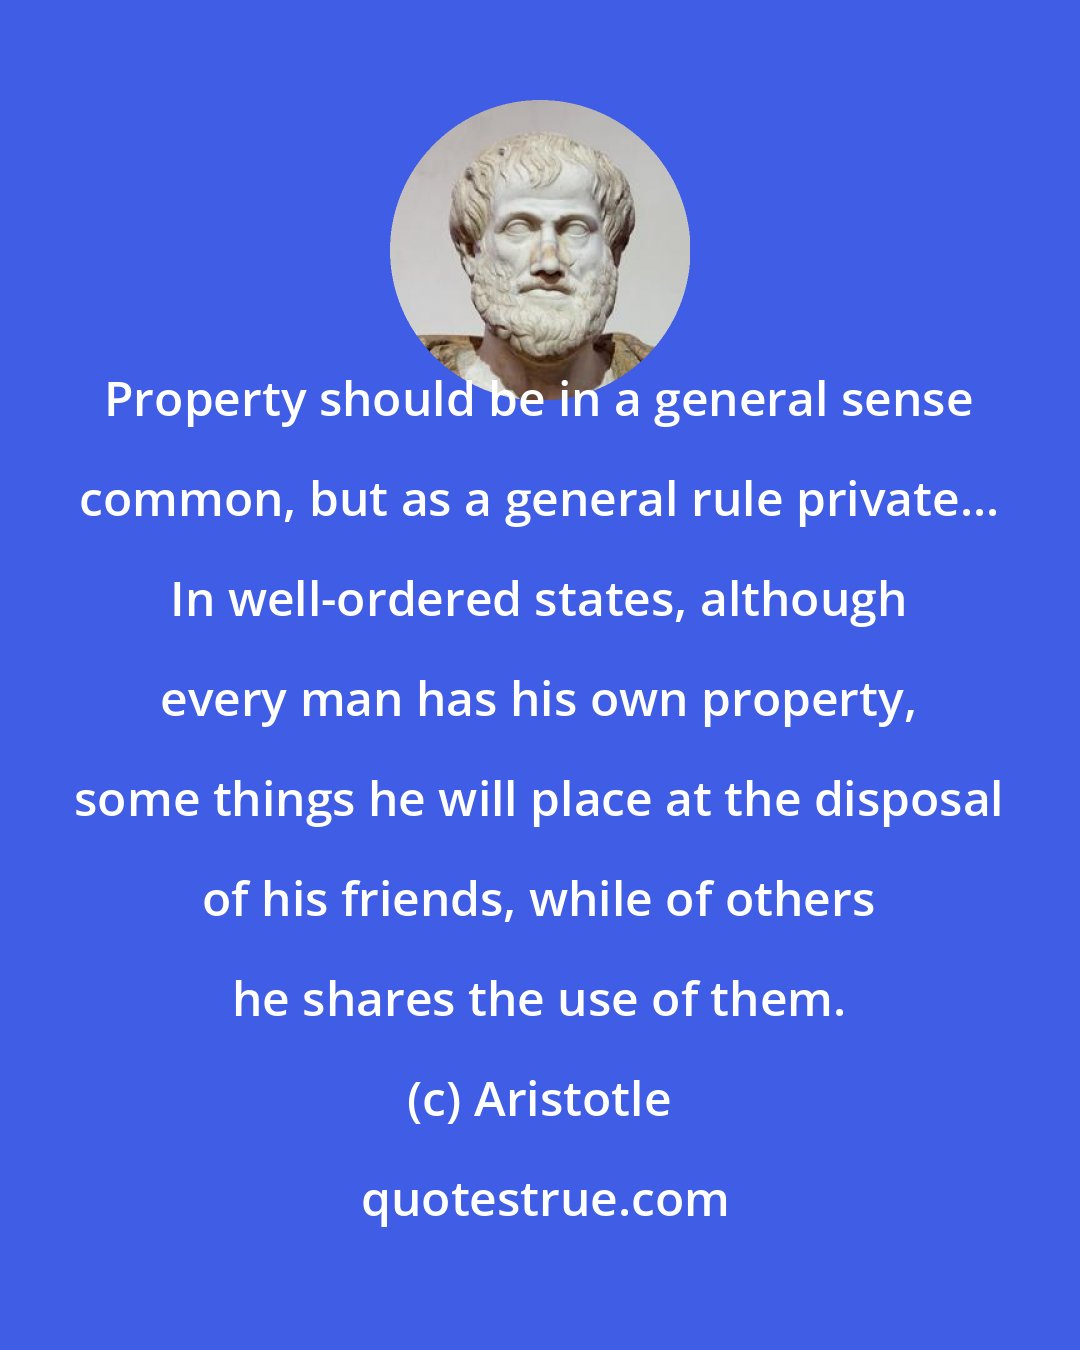 Aristotle: Property should be in a general sense common, but as a general rule private... In well-ordered states, although every man has his own property, some things he will place at the disposal of his friends, while of others he shares the use of them.